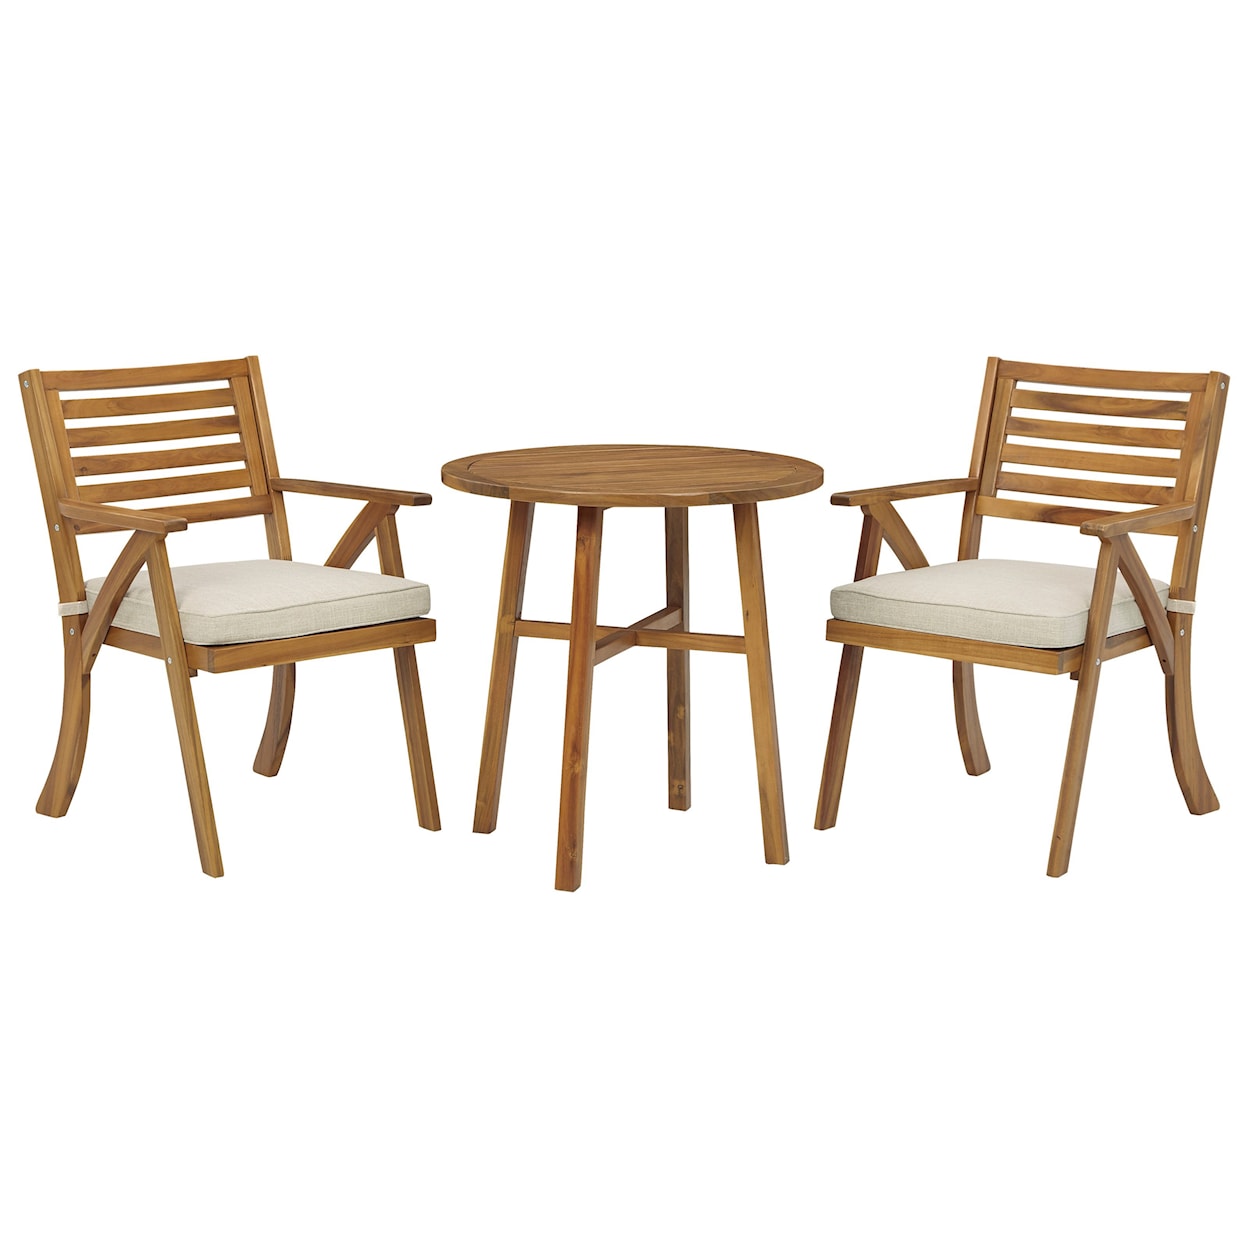 Signature Design by Ashley Vallerie 3-Piece Table & Chairs with Cushion Set